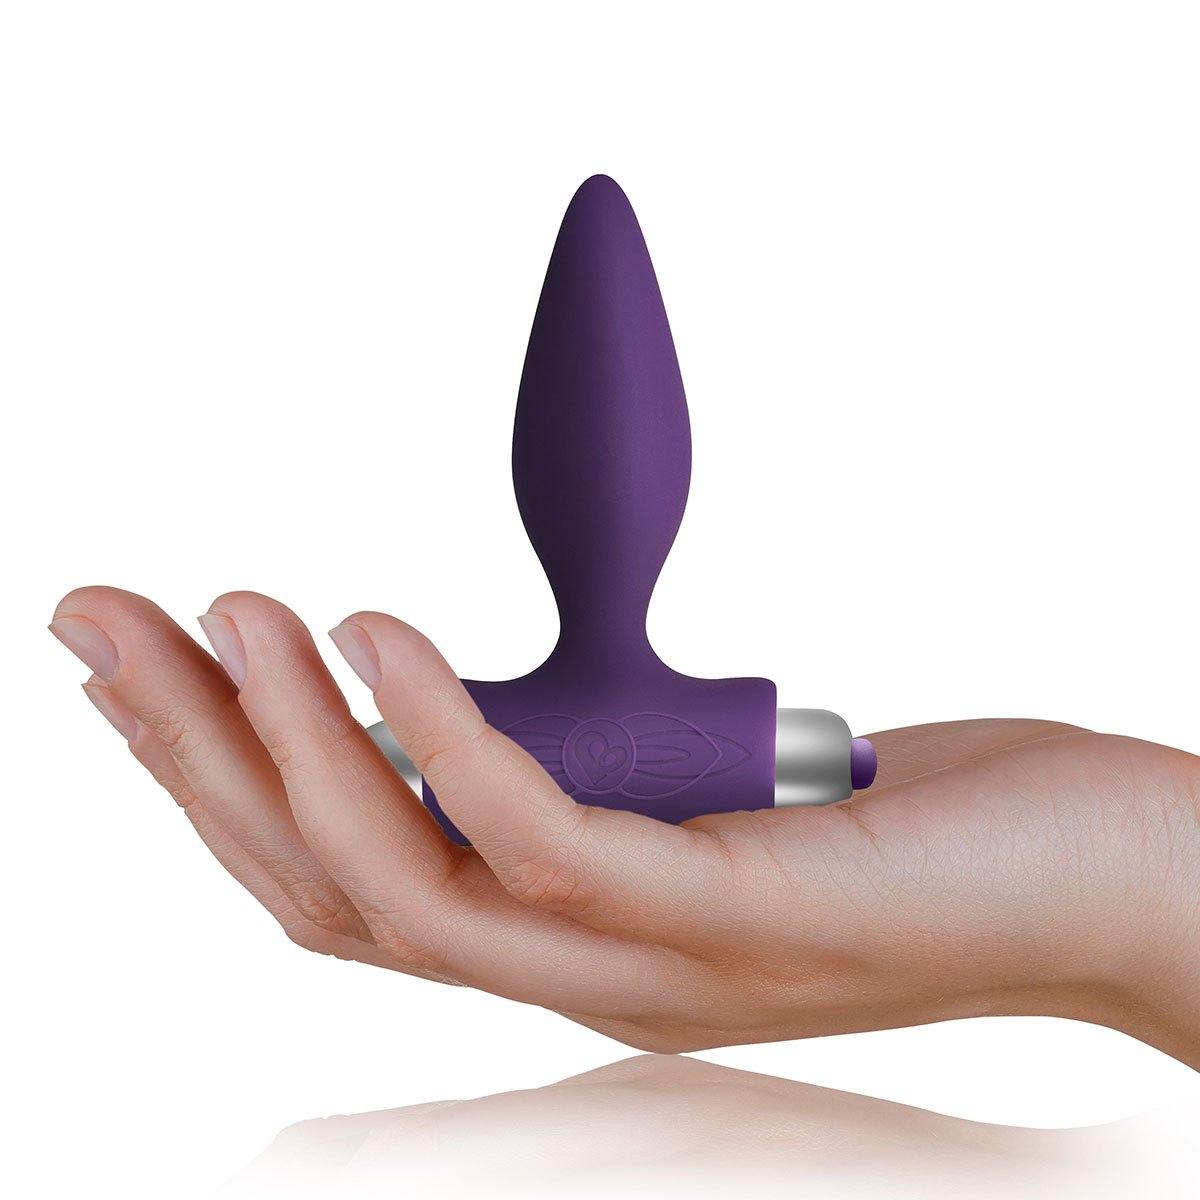 Petite Sensations Smooth Plug - Purple - Buy At Luxury Toy X - Free 3-Day Shipping